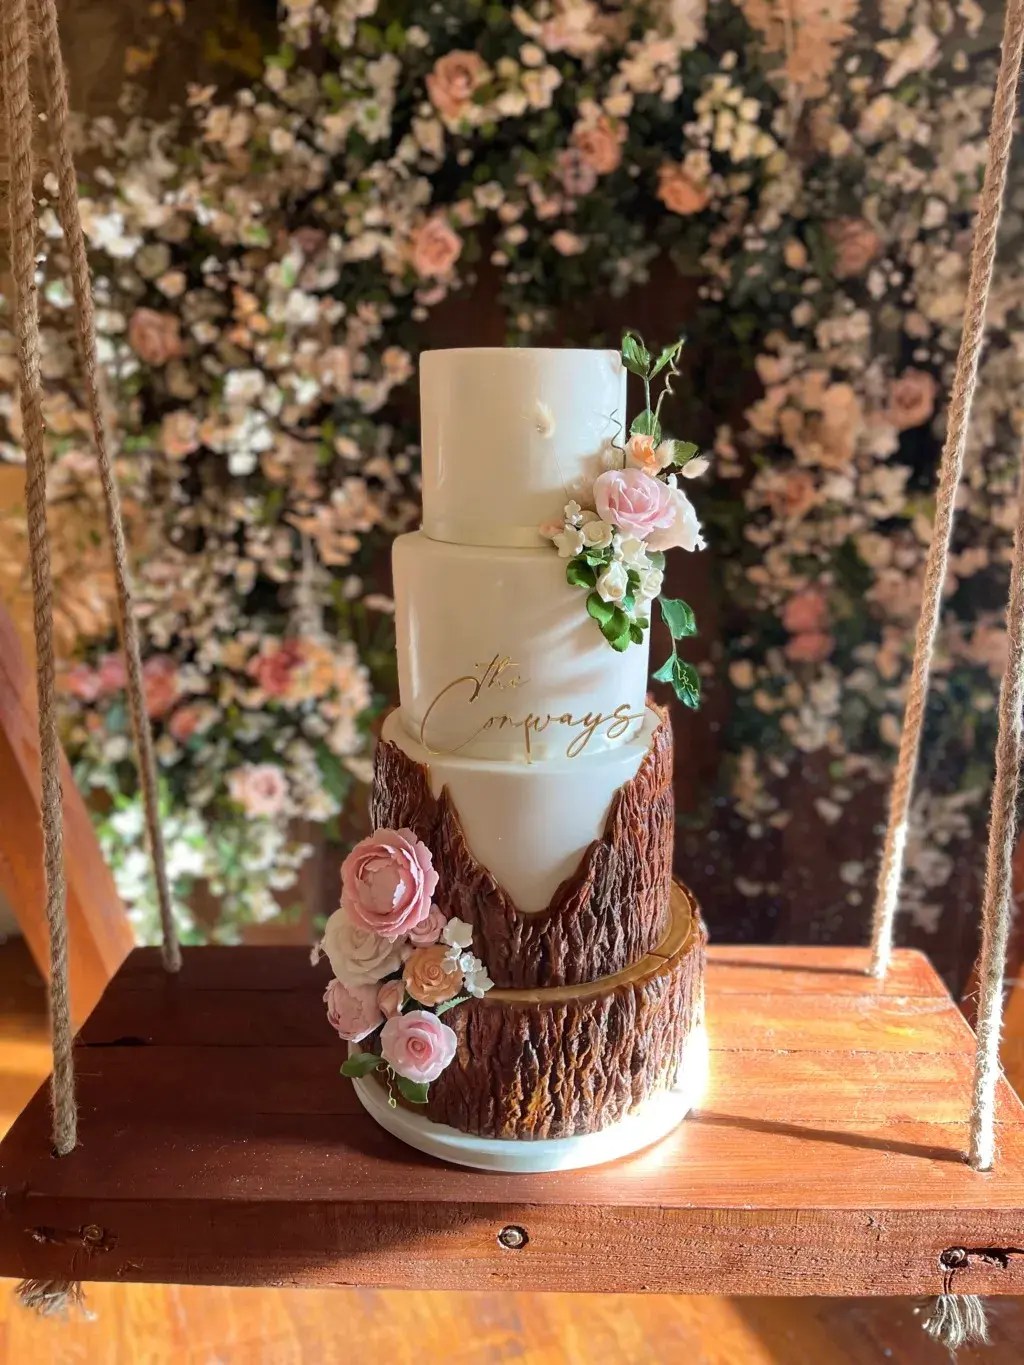 Looking For Trend-Led Wedding Cakes? Meet SD Cakes Ireland